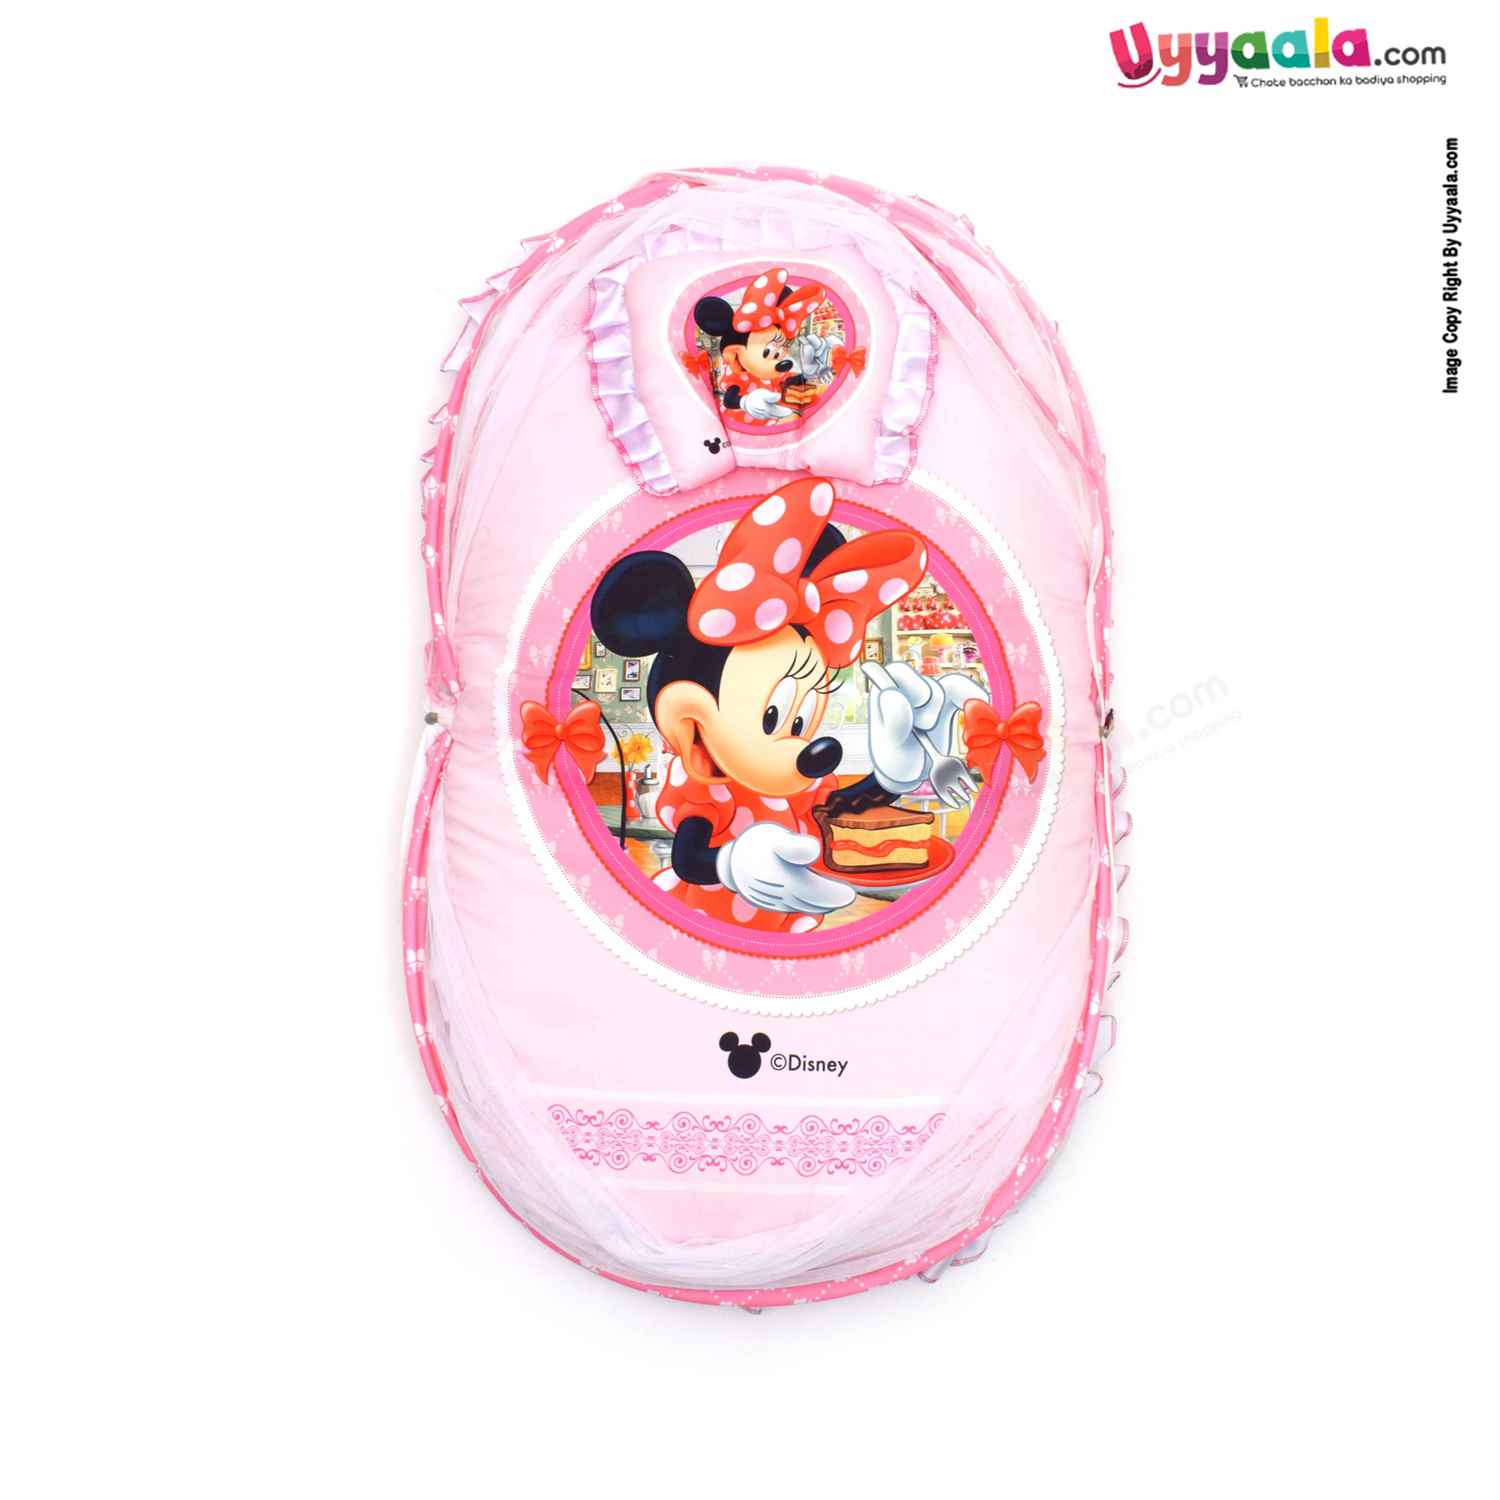 DISNEY Baby Bedding Set with Protection Net & Pillow Cotton, Minnie Mouse Print 0+m Age - Pink